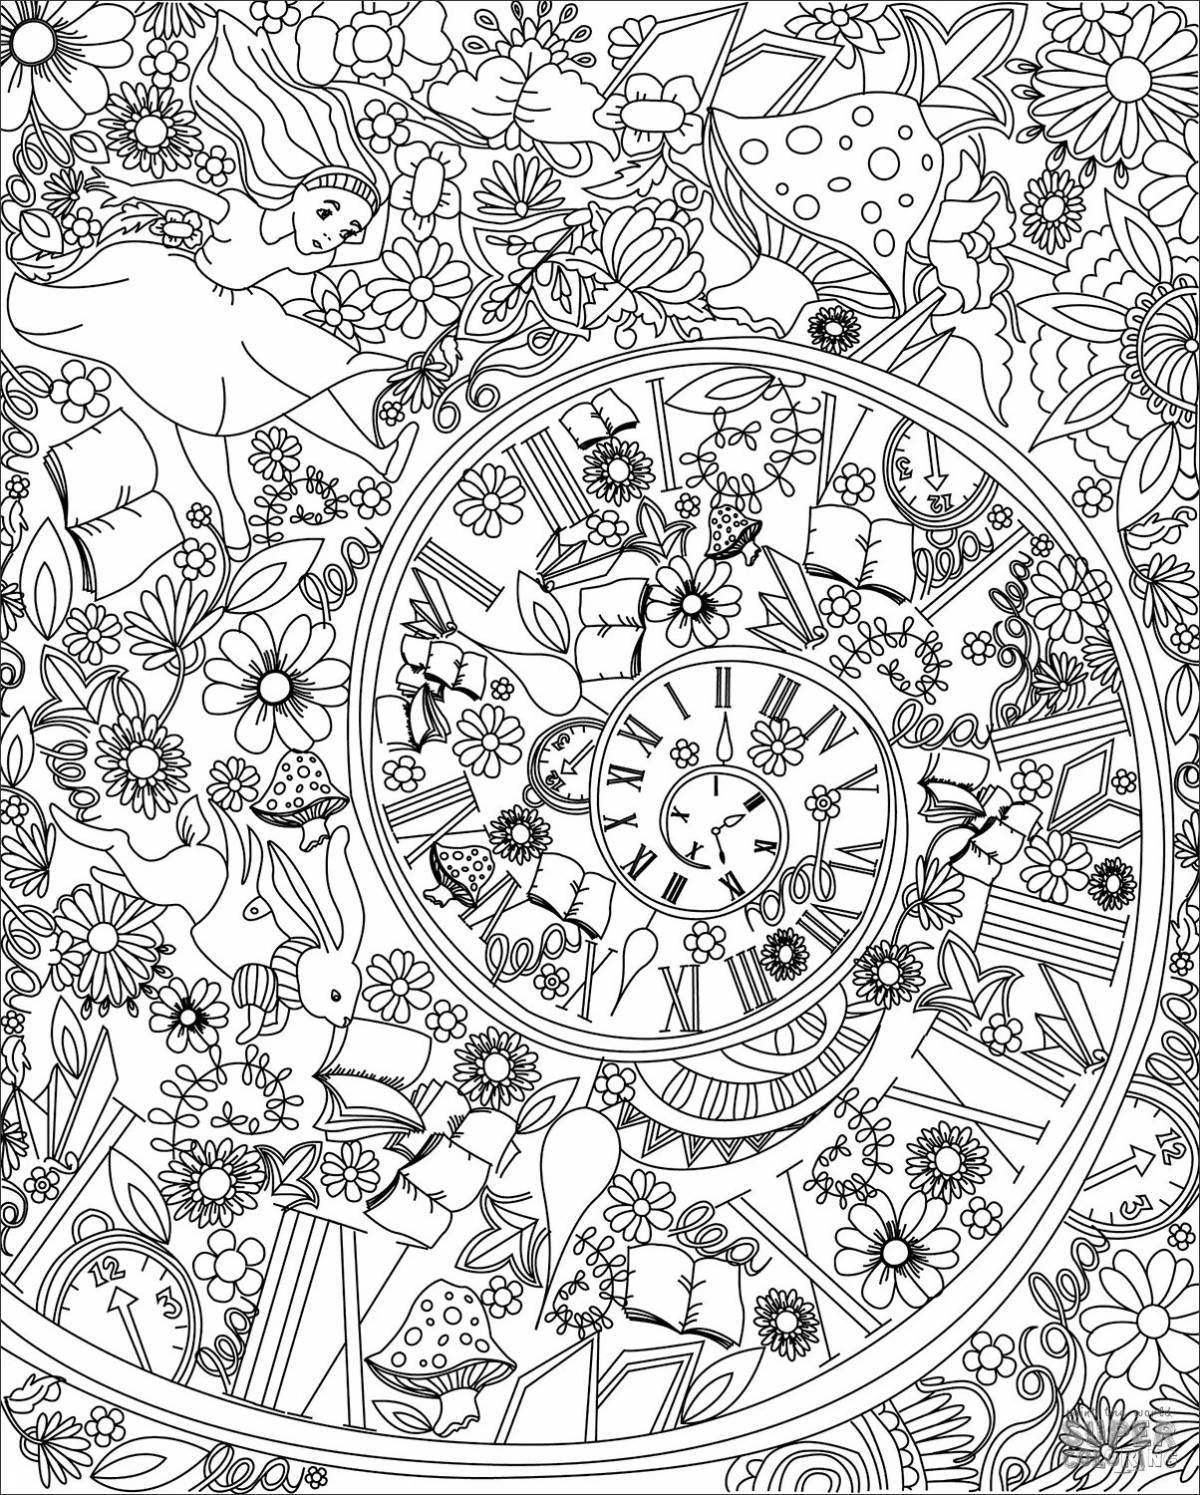 Sparkly adult coloring book